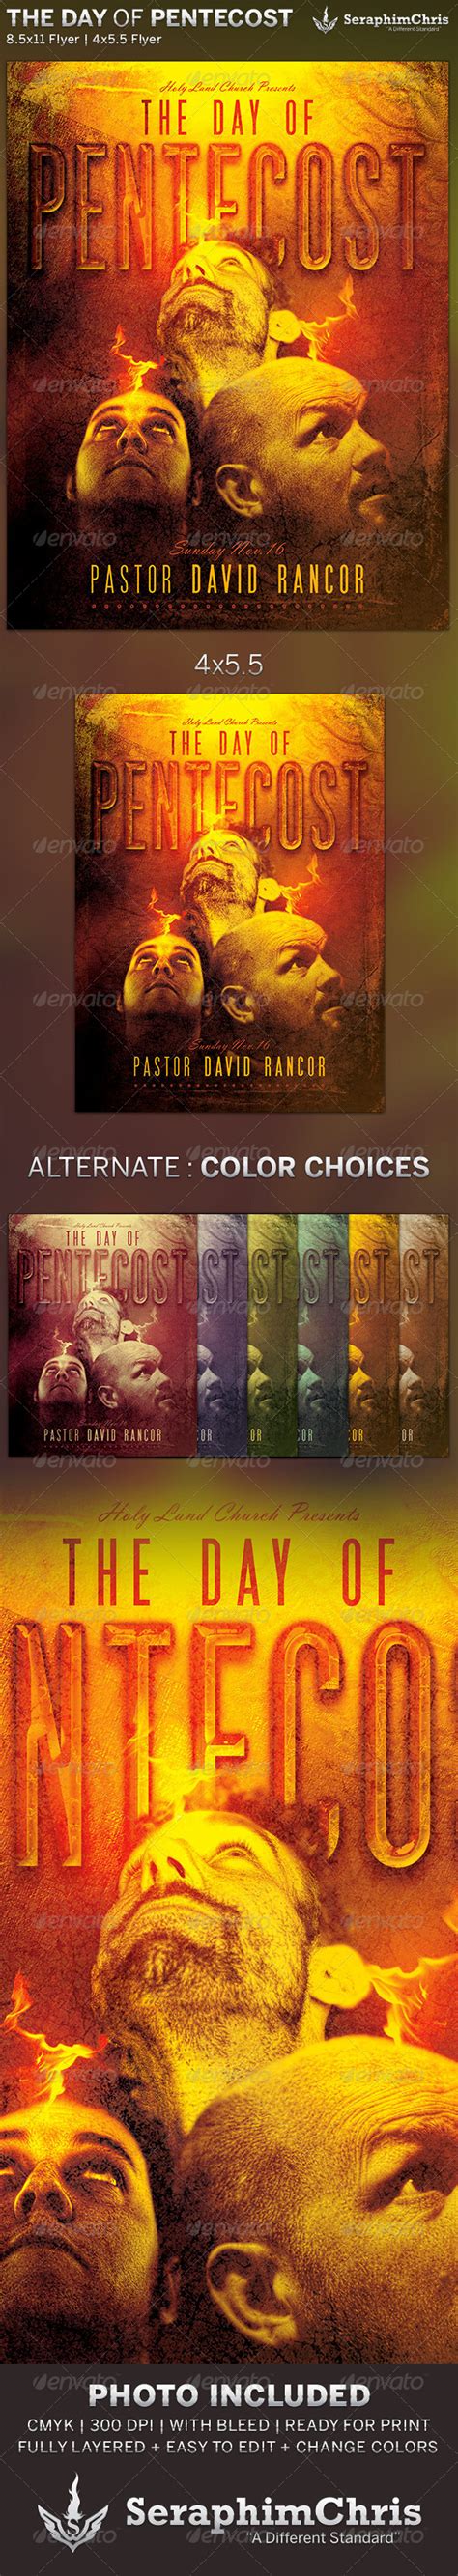 The Day Of Pentecost Church Flyer Template By